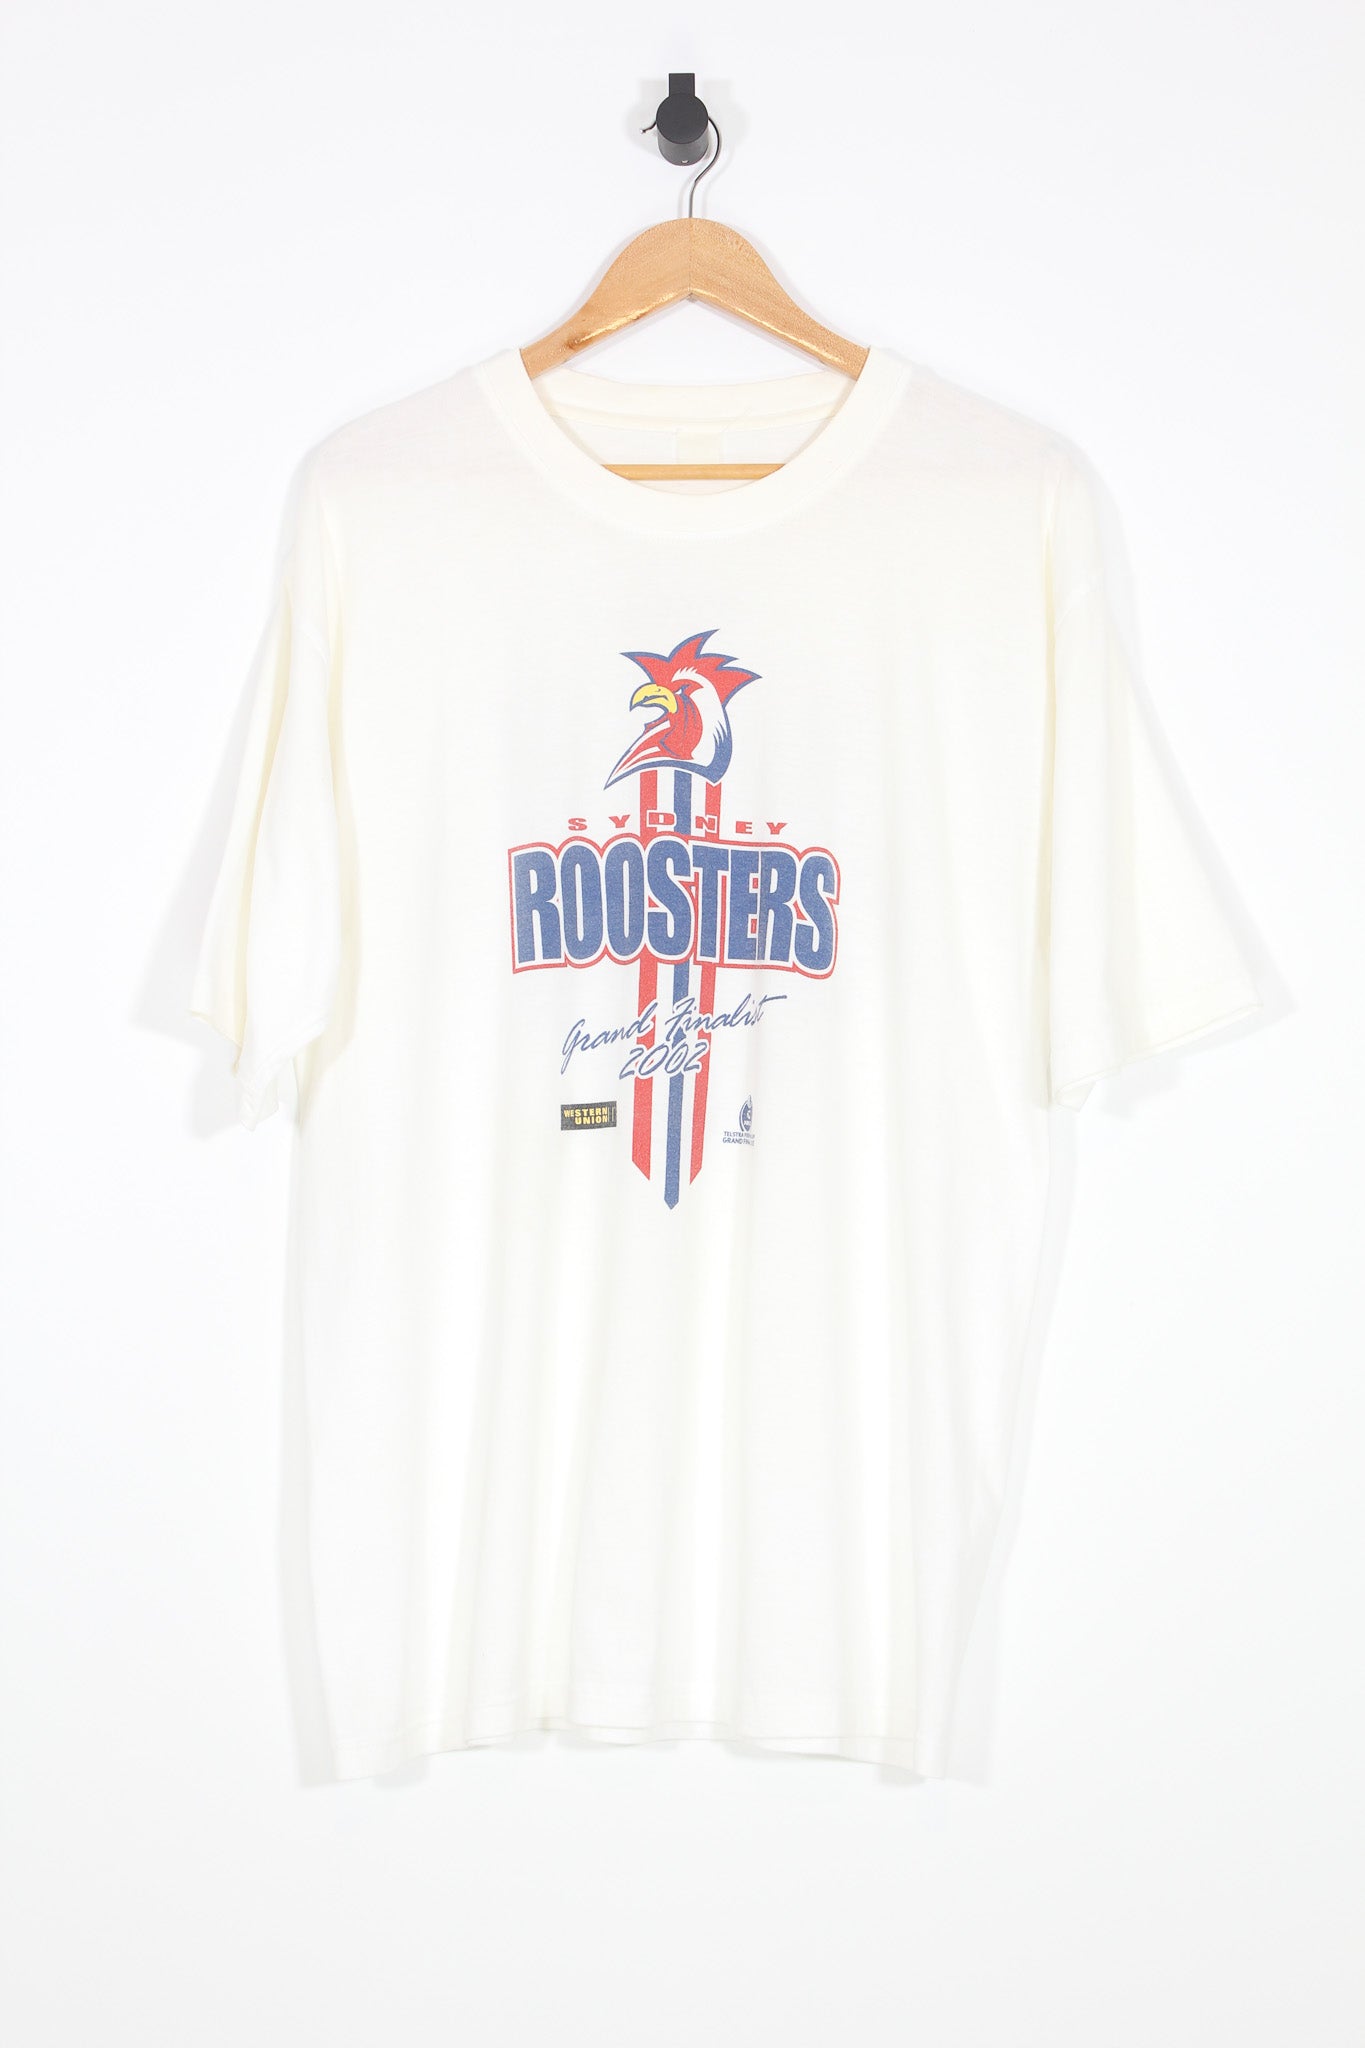 Vintage 2002 Sydney Roosters Grand Finalists NRL T-Shirt - XL